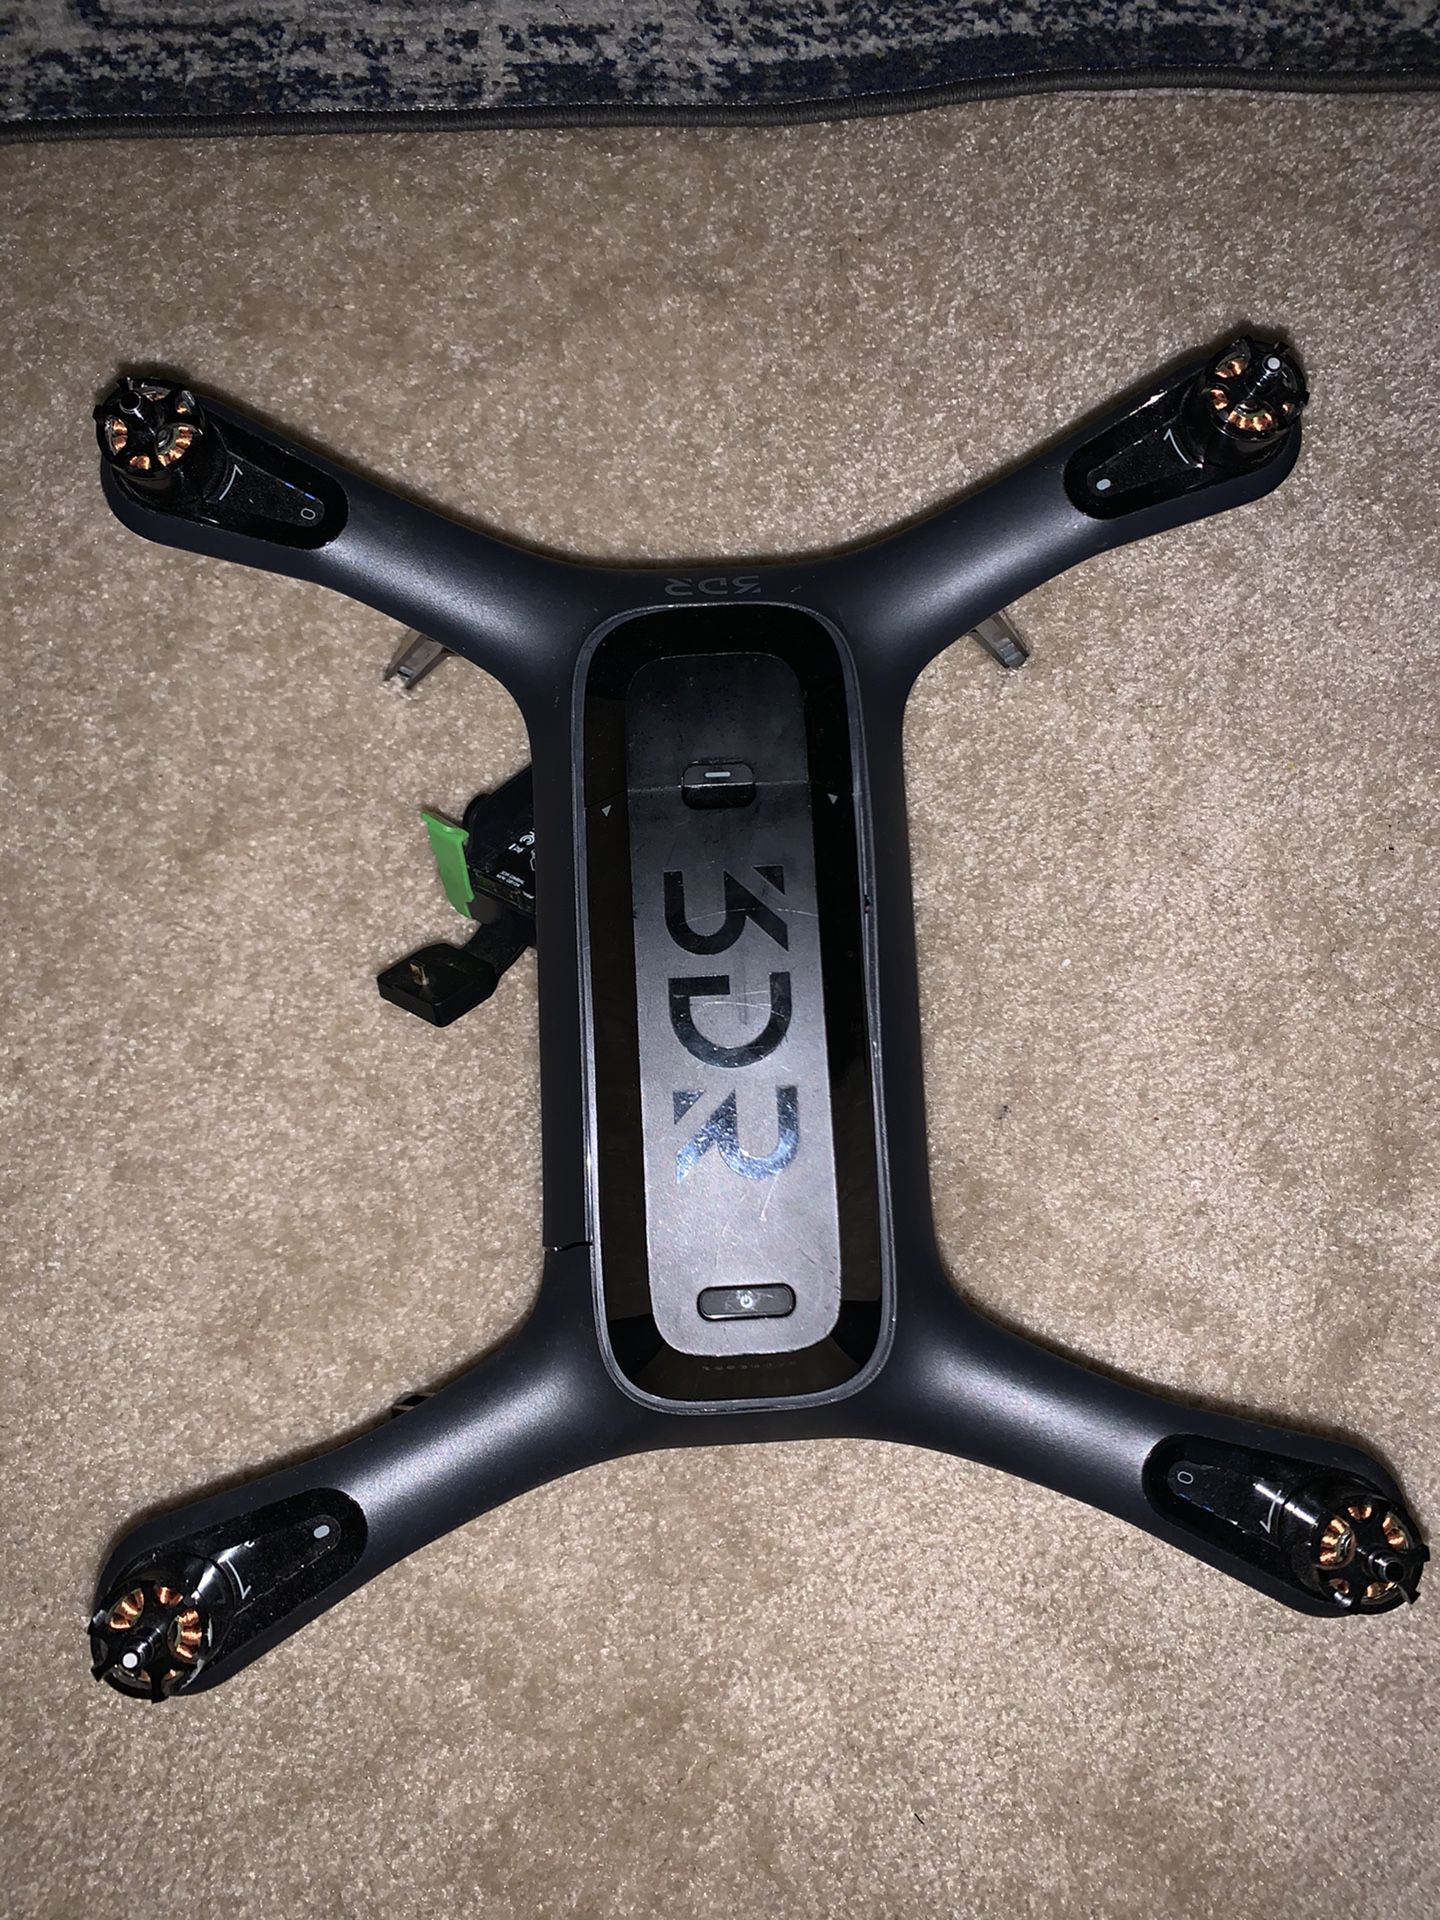 3DR Solo Quadcopter Drone Body w/ battery & Gimbal